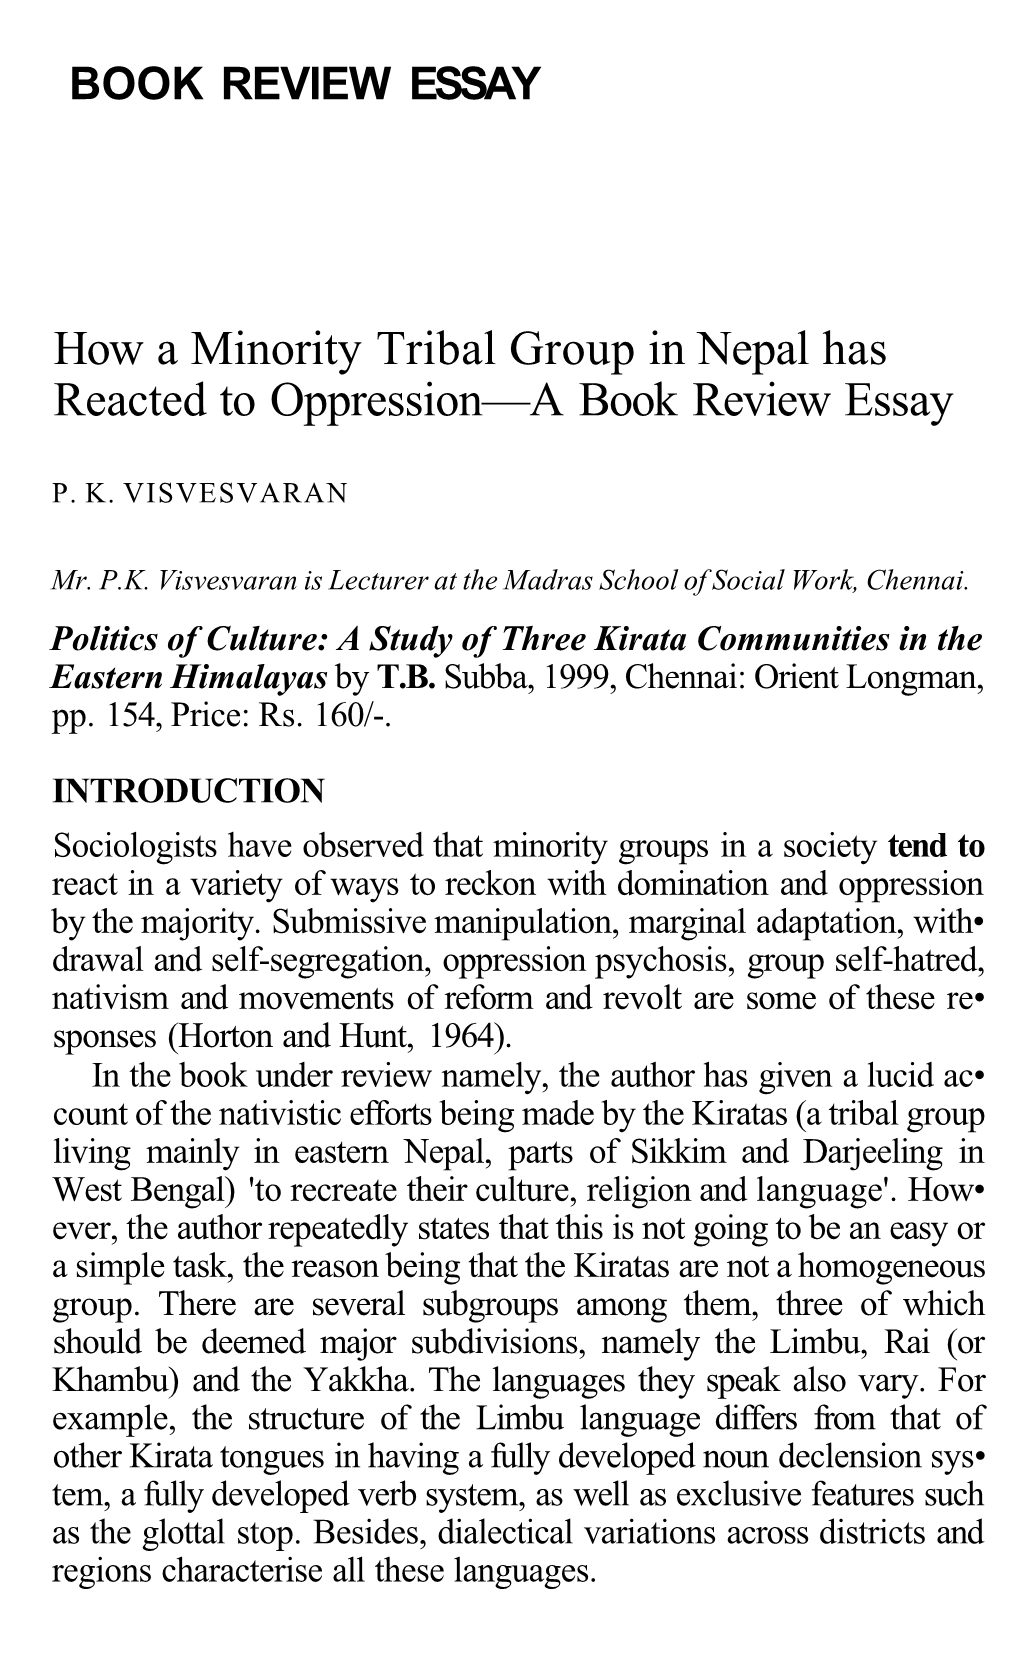 How a Minority Tribal Group in Nepal Has Reacted to Oppression—A Book Review Essay